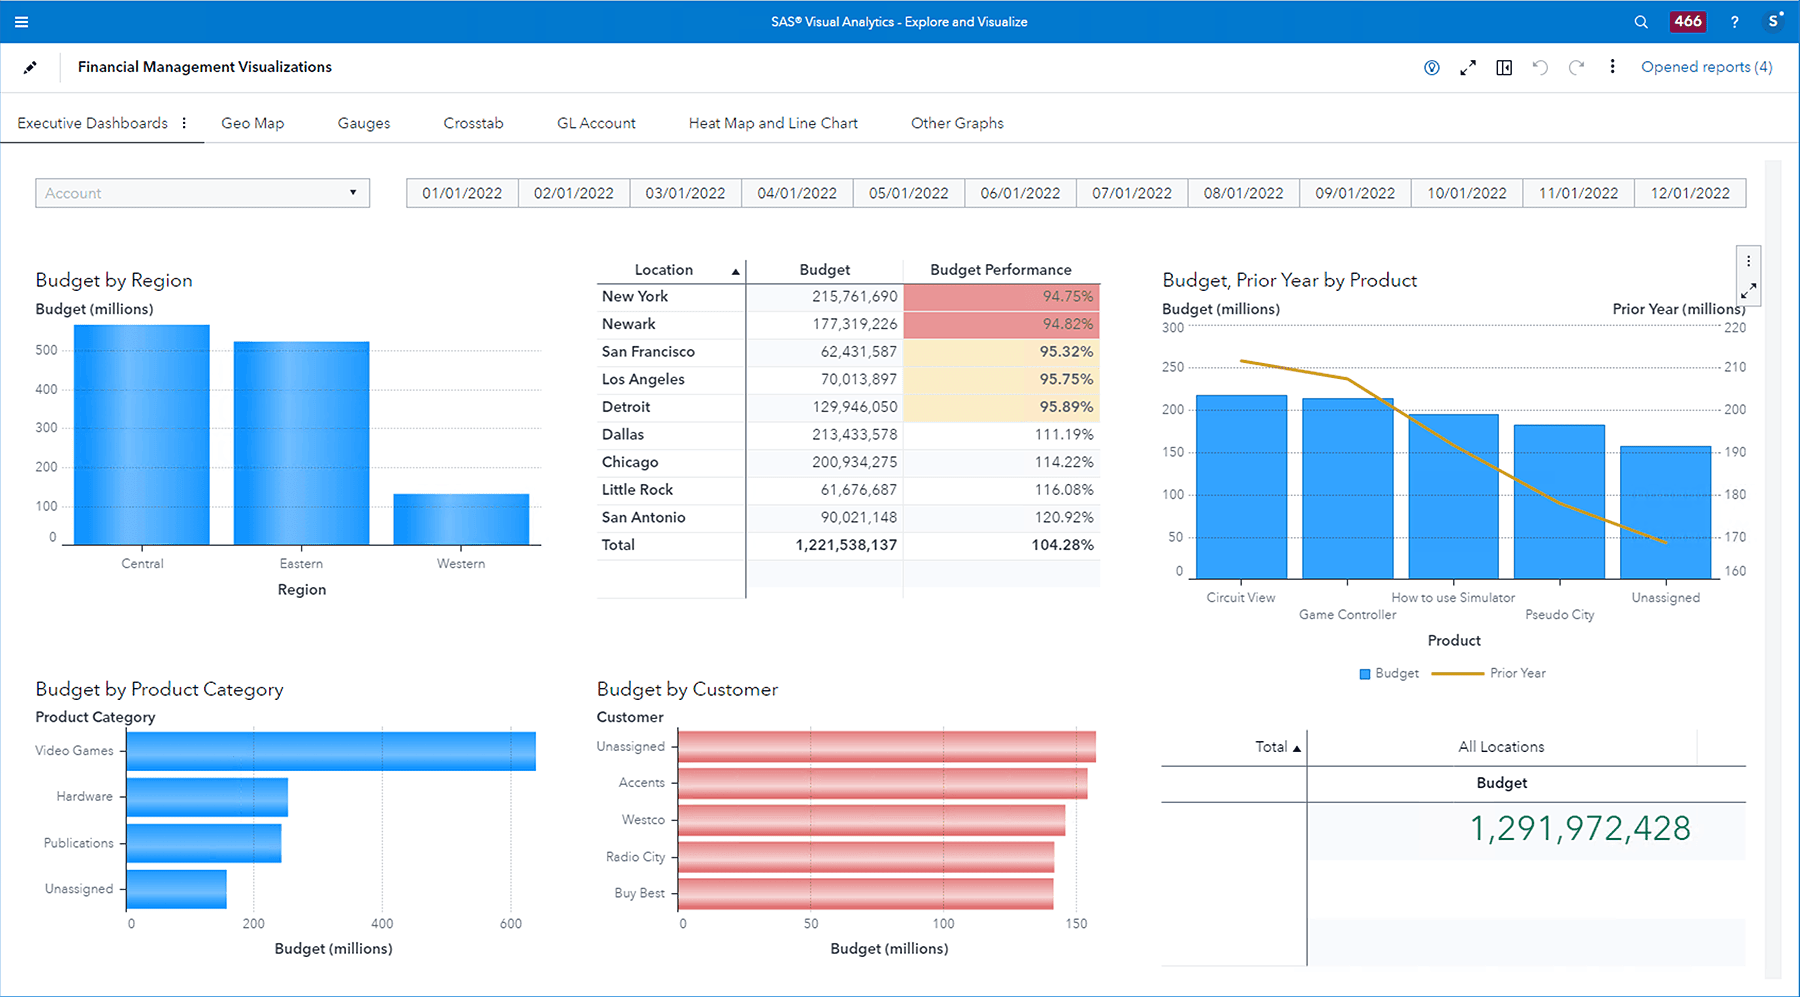 SAS Intelligent Performance Management screenshot showing the ability to improve process efficiency